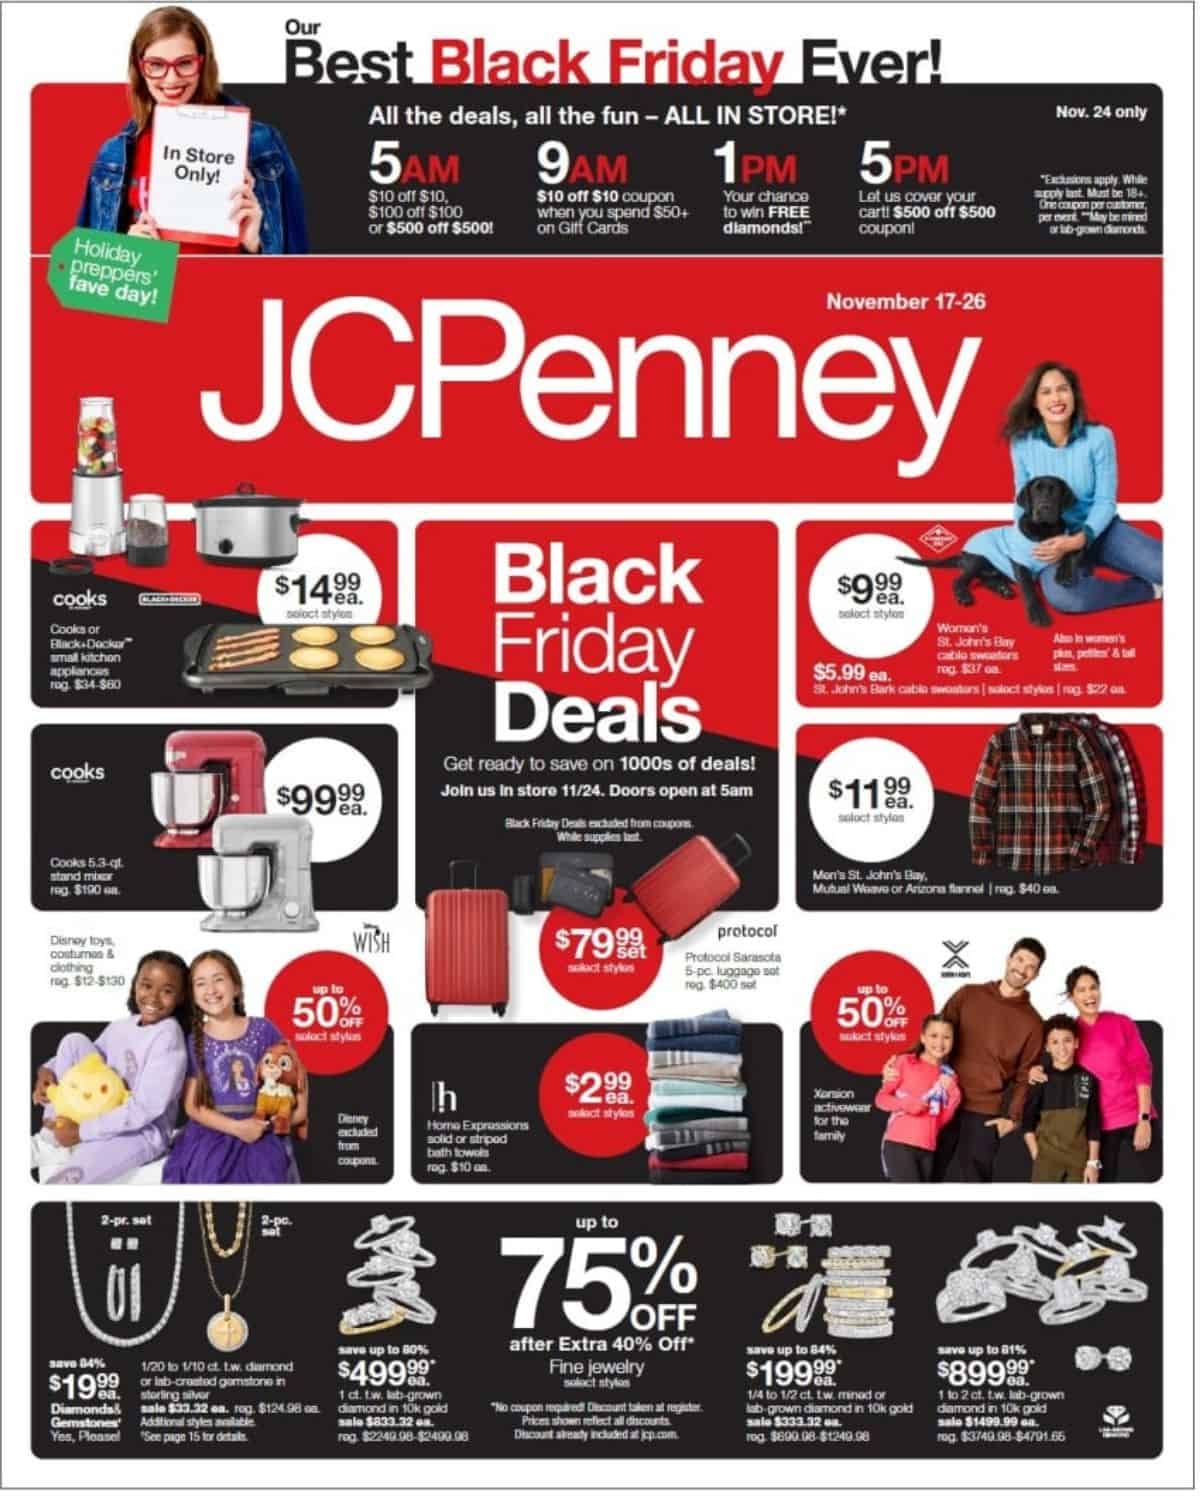 JCPenney coupon giveaway returns after store closings, bankruptcy